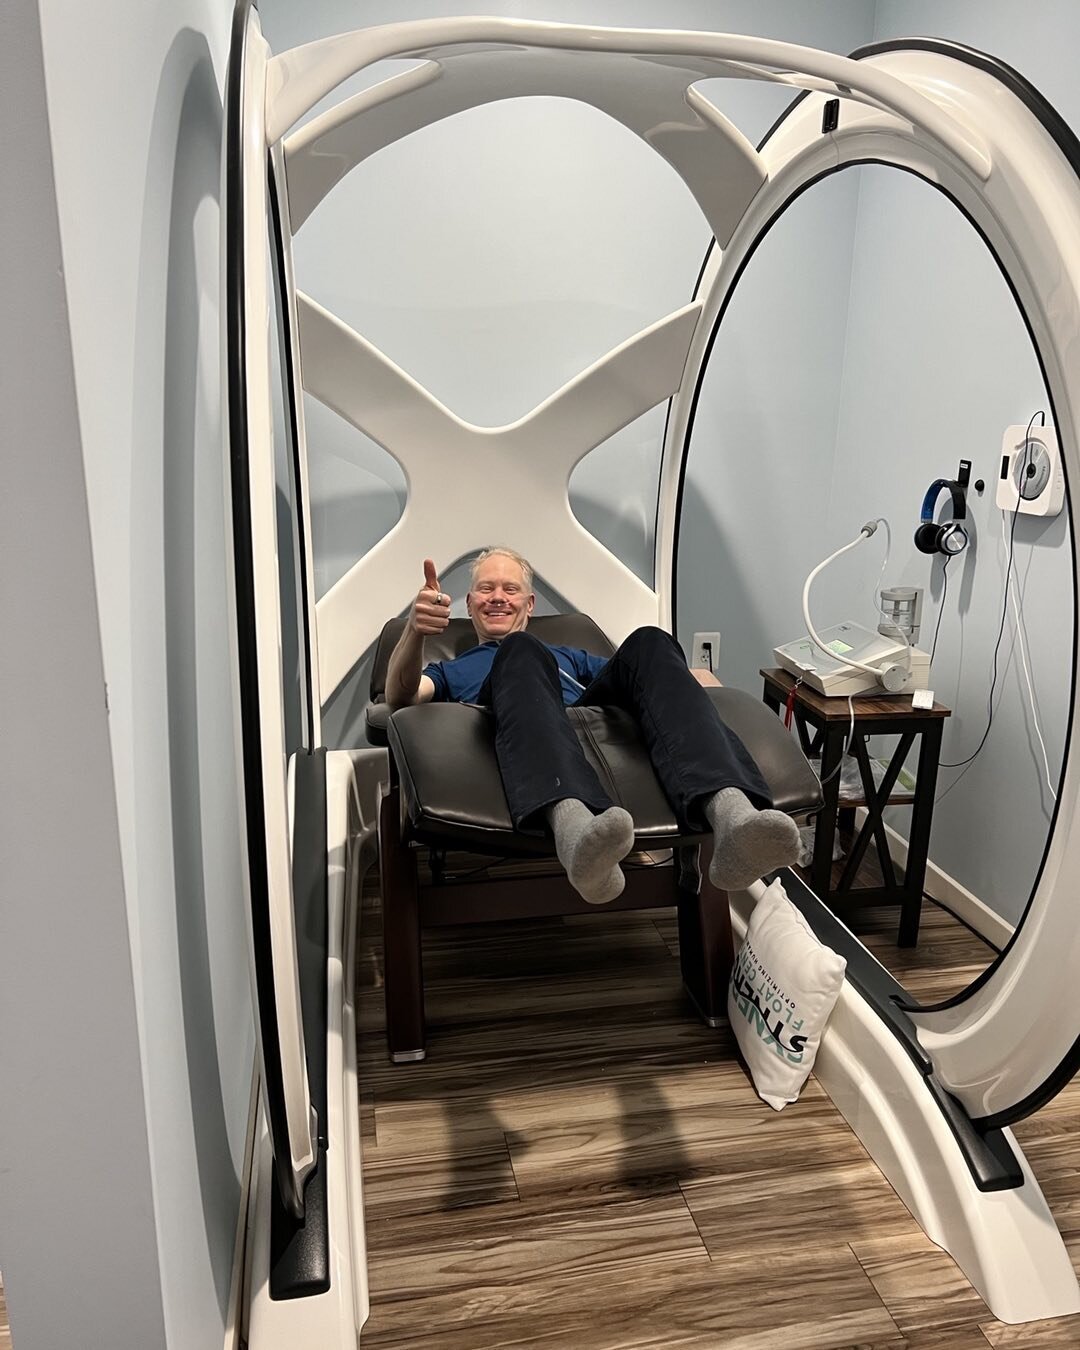 One of my favorite was to relax and reboot my nervous system is with the Magneshere! A 1 hour session combined with the NanoVi and NuCalm is a great way to reset and recharge!